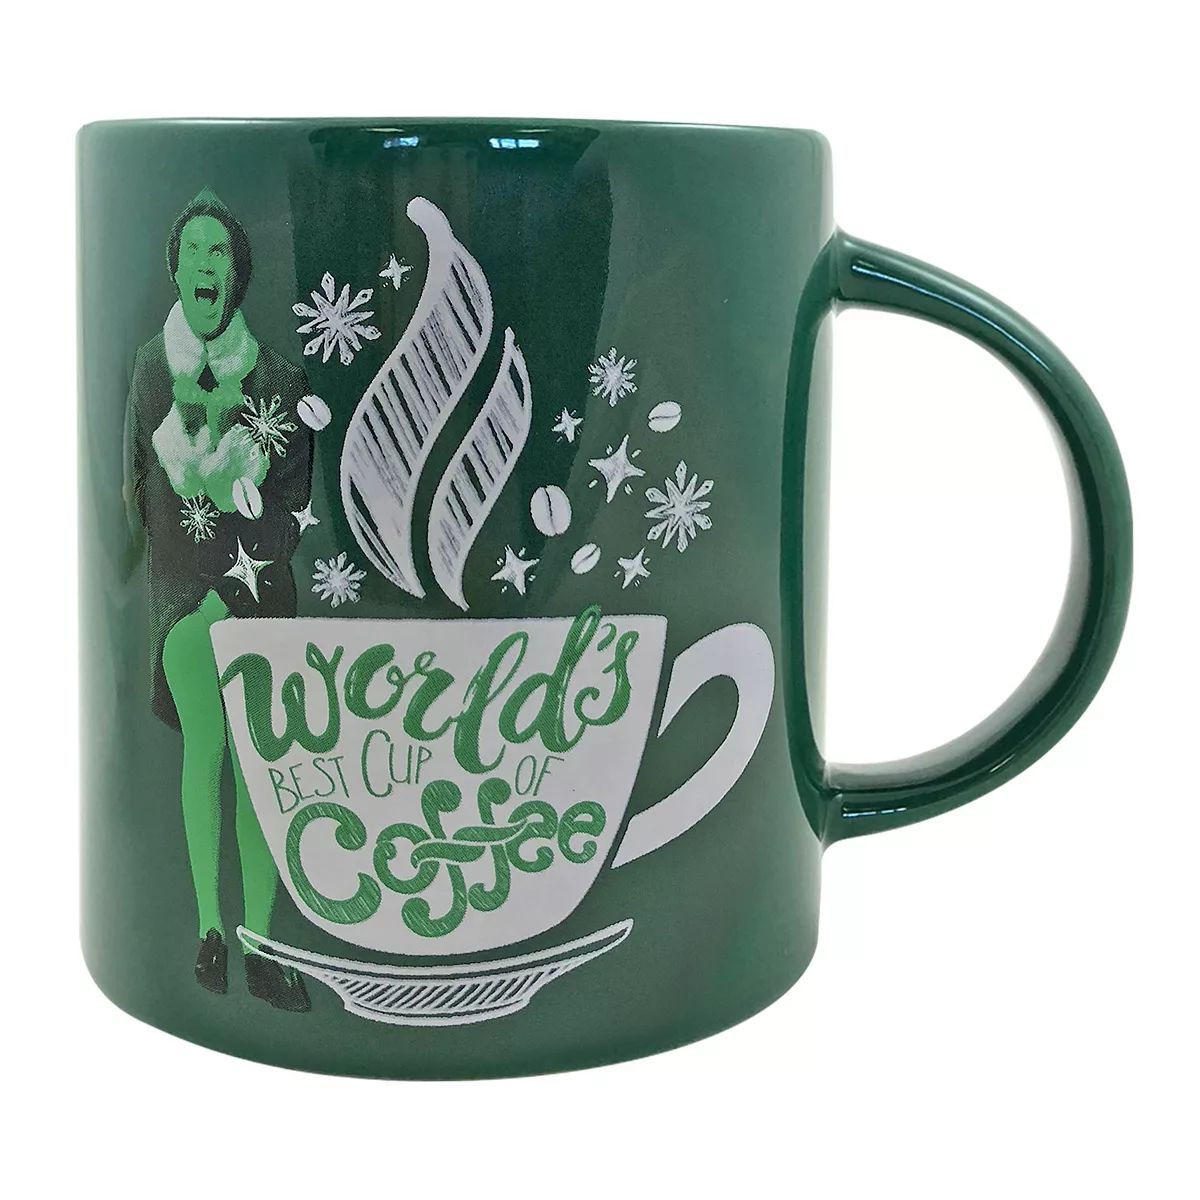 Elf the Movie "World's Best Cup of Coffee" 15-ounce Boxed Ceramic Mug | Kohl's